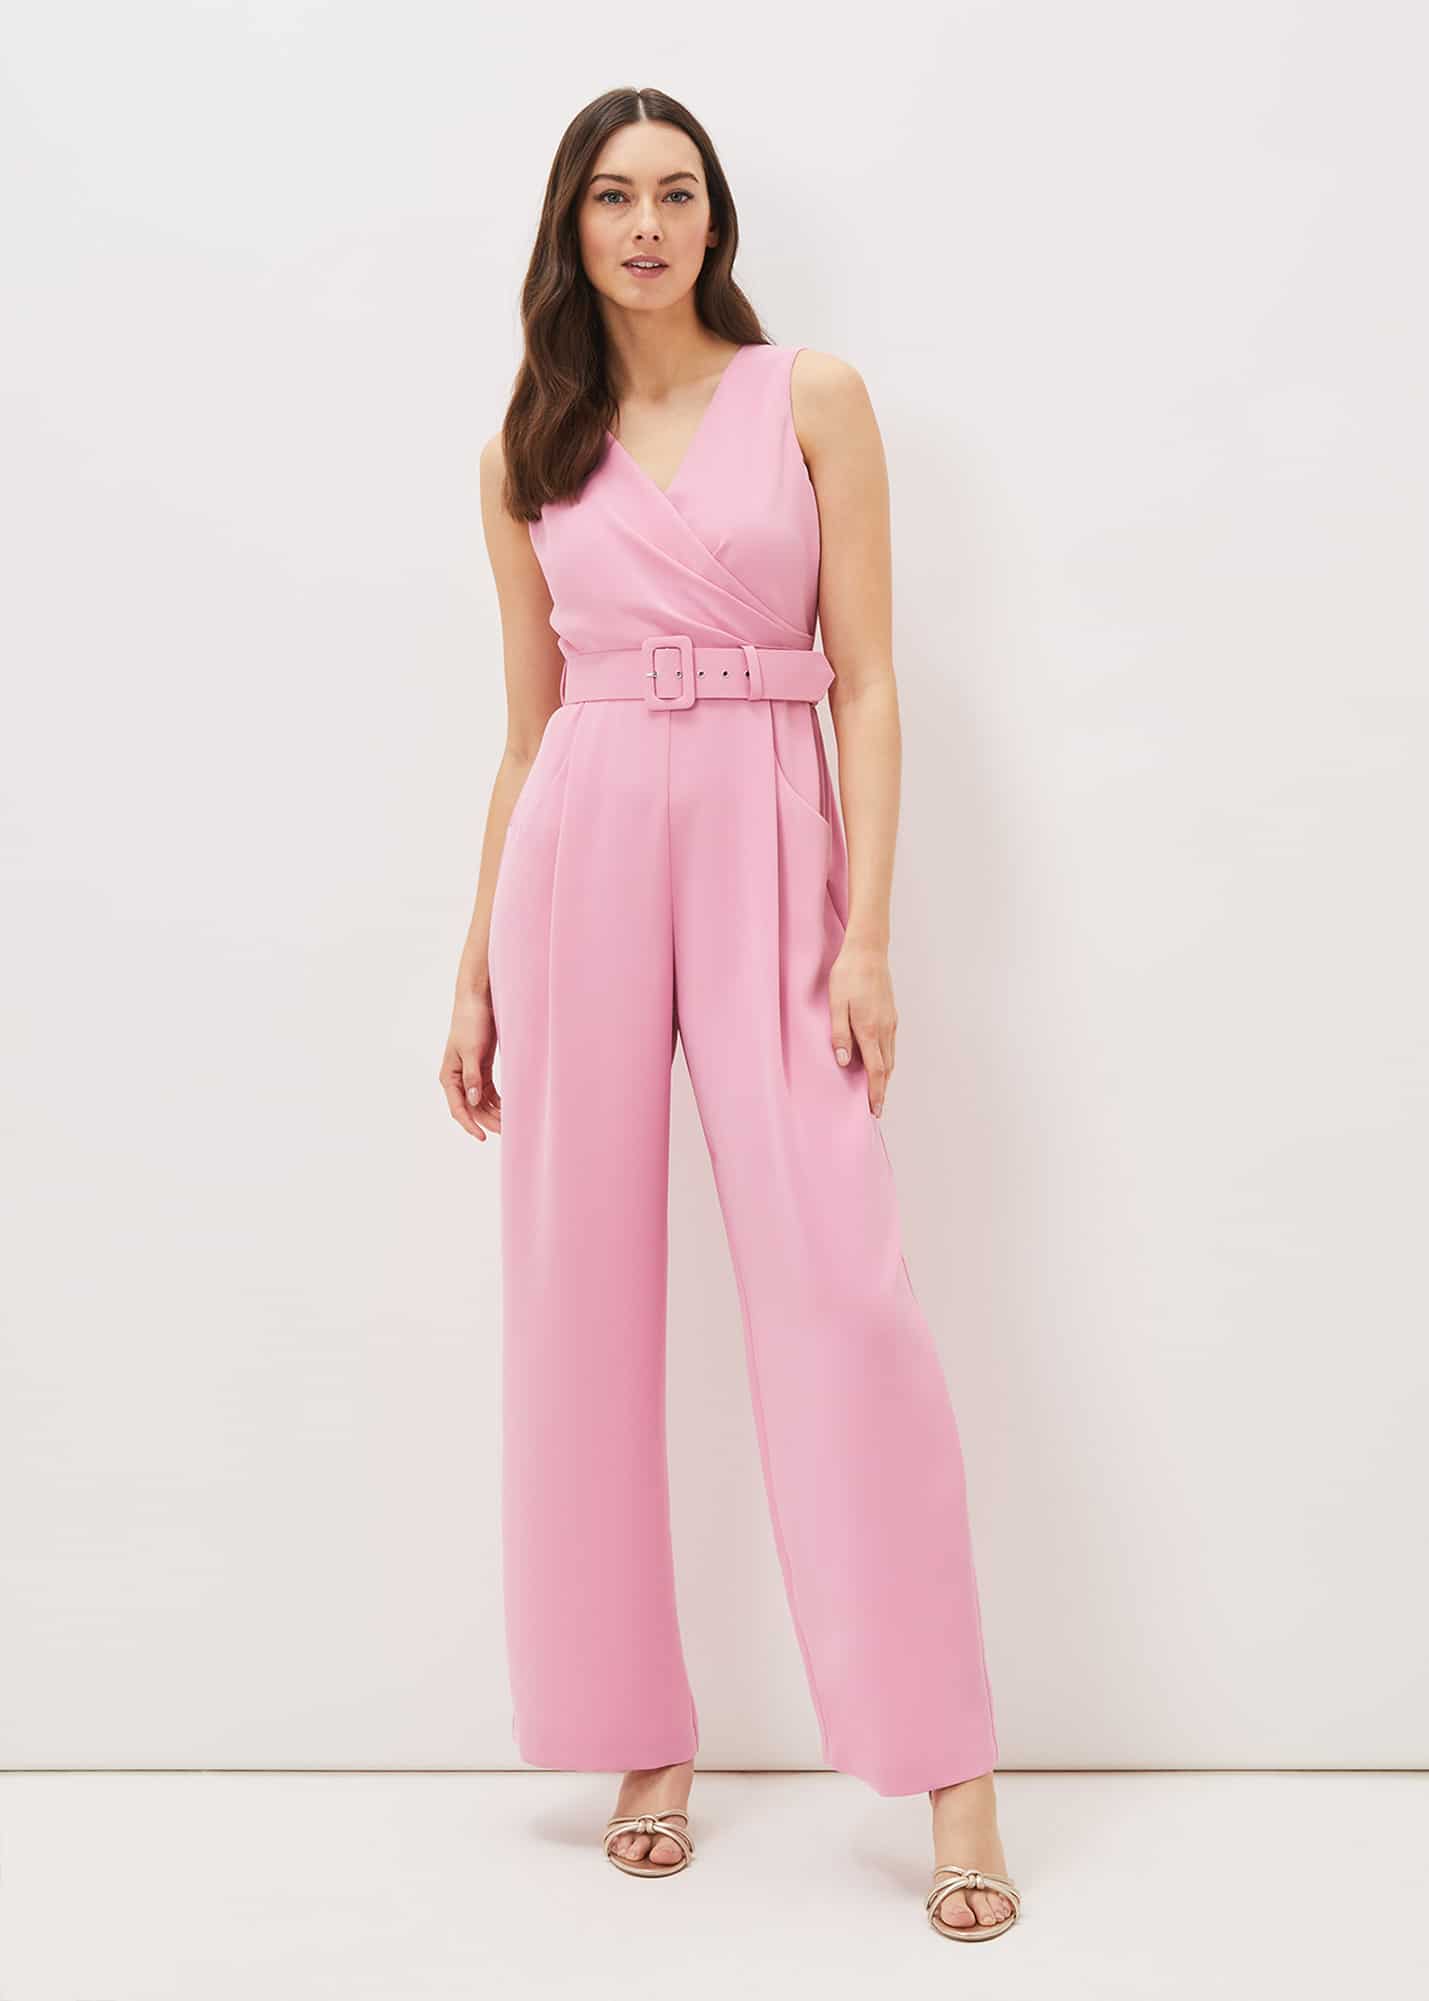 Phase Eight Women's Lissia Pink Wide Leg Jumpsuit